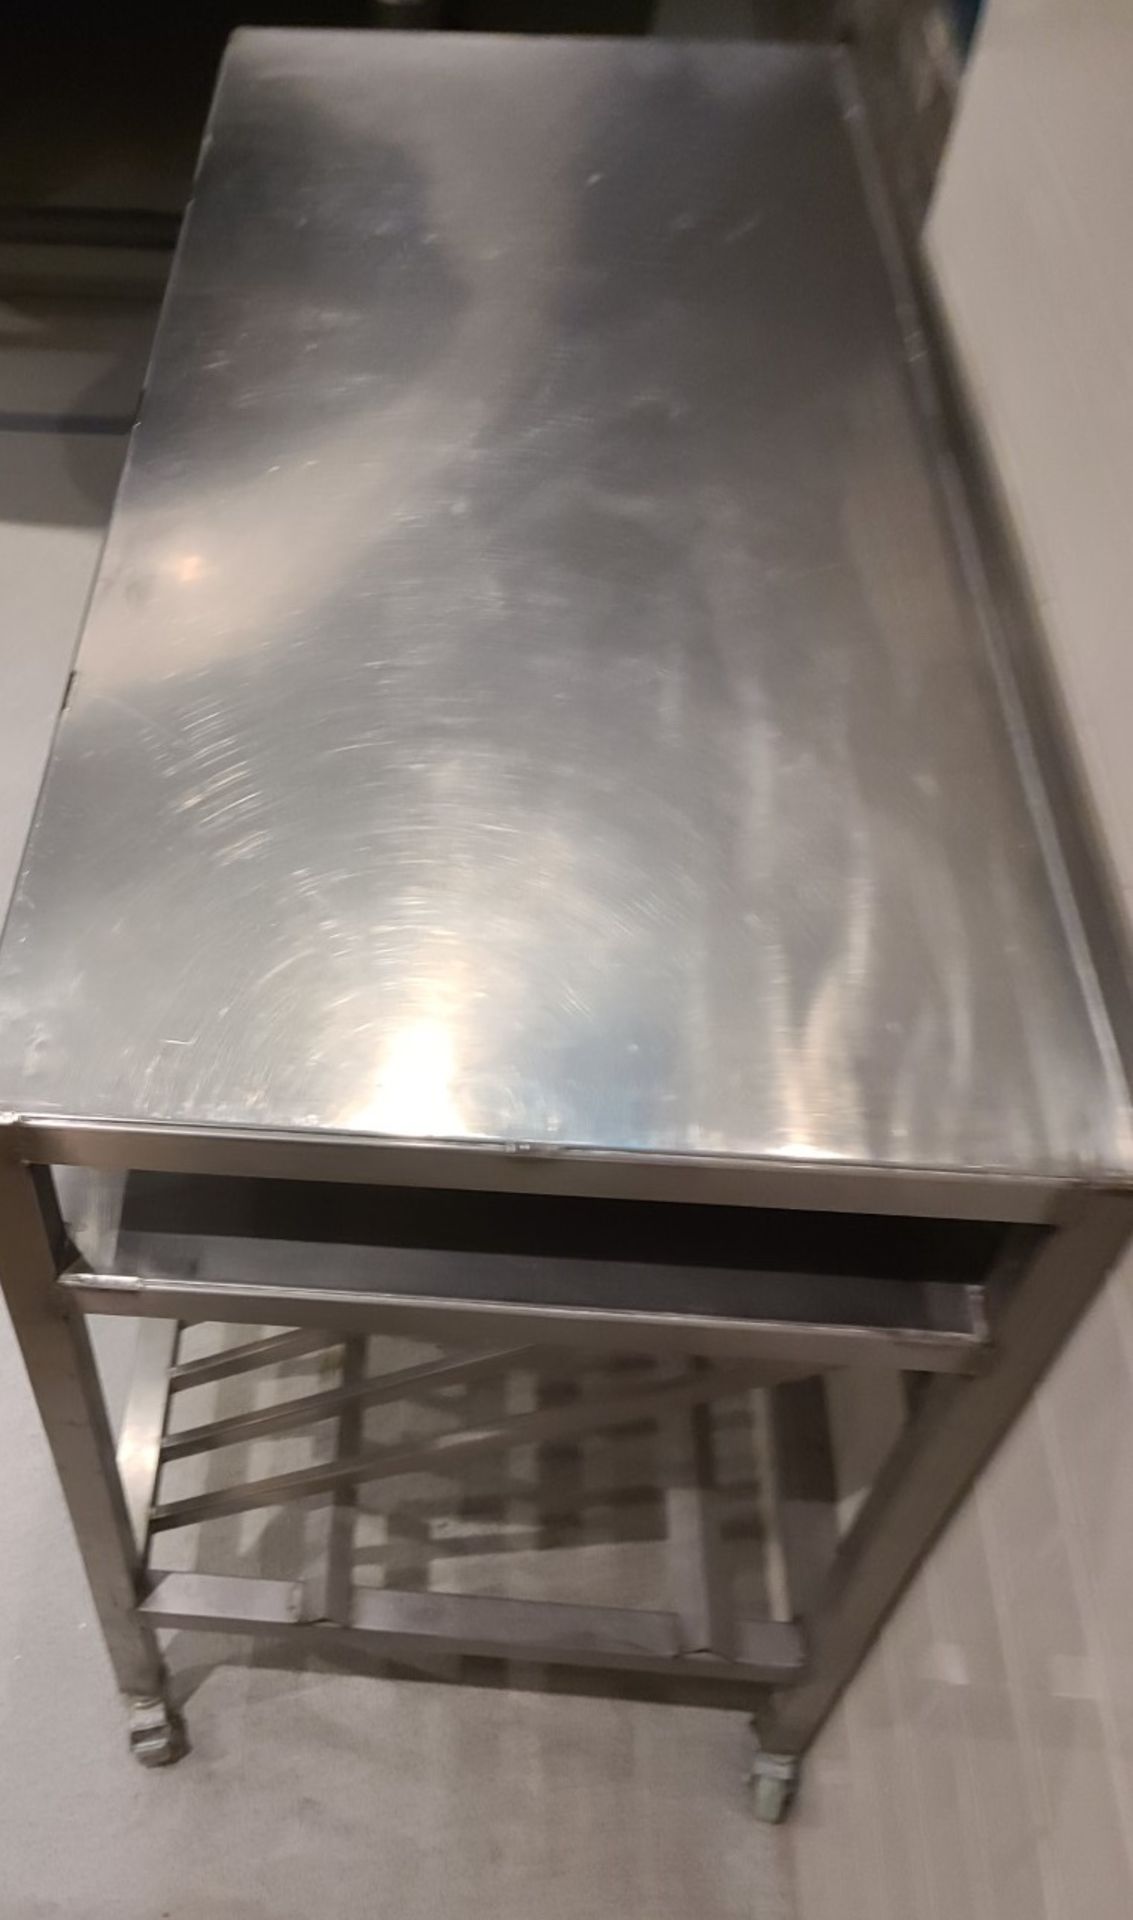 1 X Stainless Steel Transportable Pizza Preparation Table, With 20 Racks For Pizza Pans & 2 Shelves - Image 2 of 2